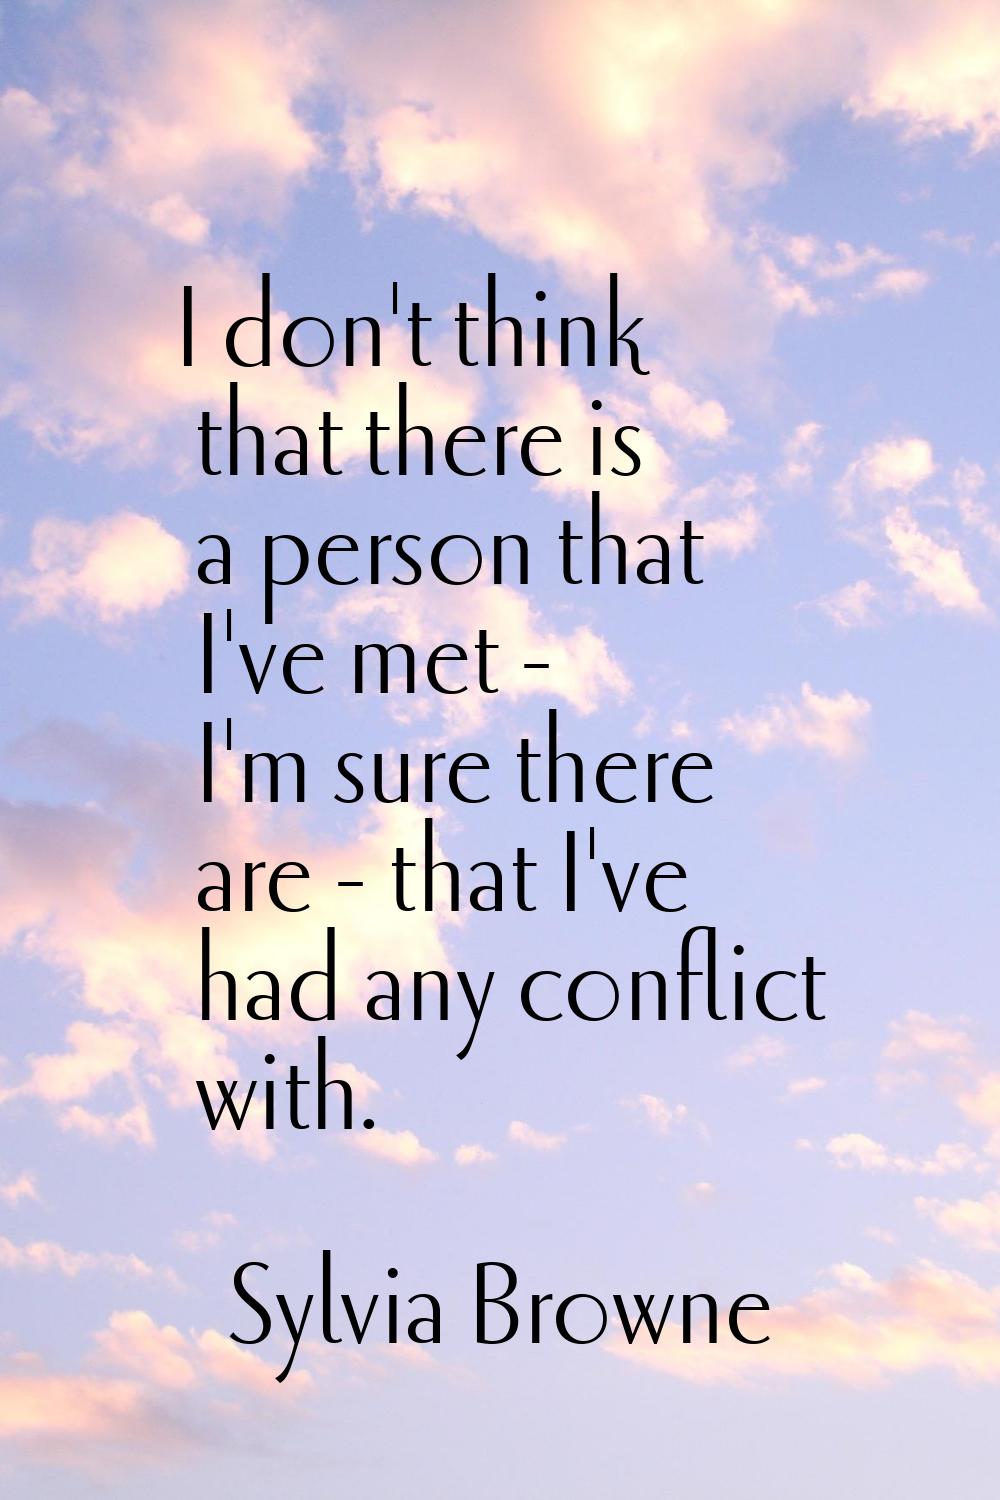 I don't think that there is a person that I've met - I'm sure there are - that I've had any conflic